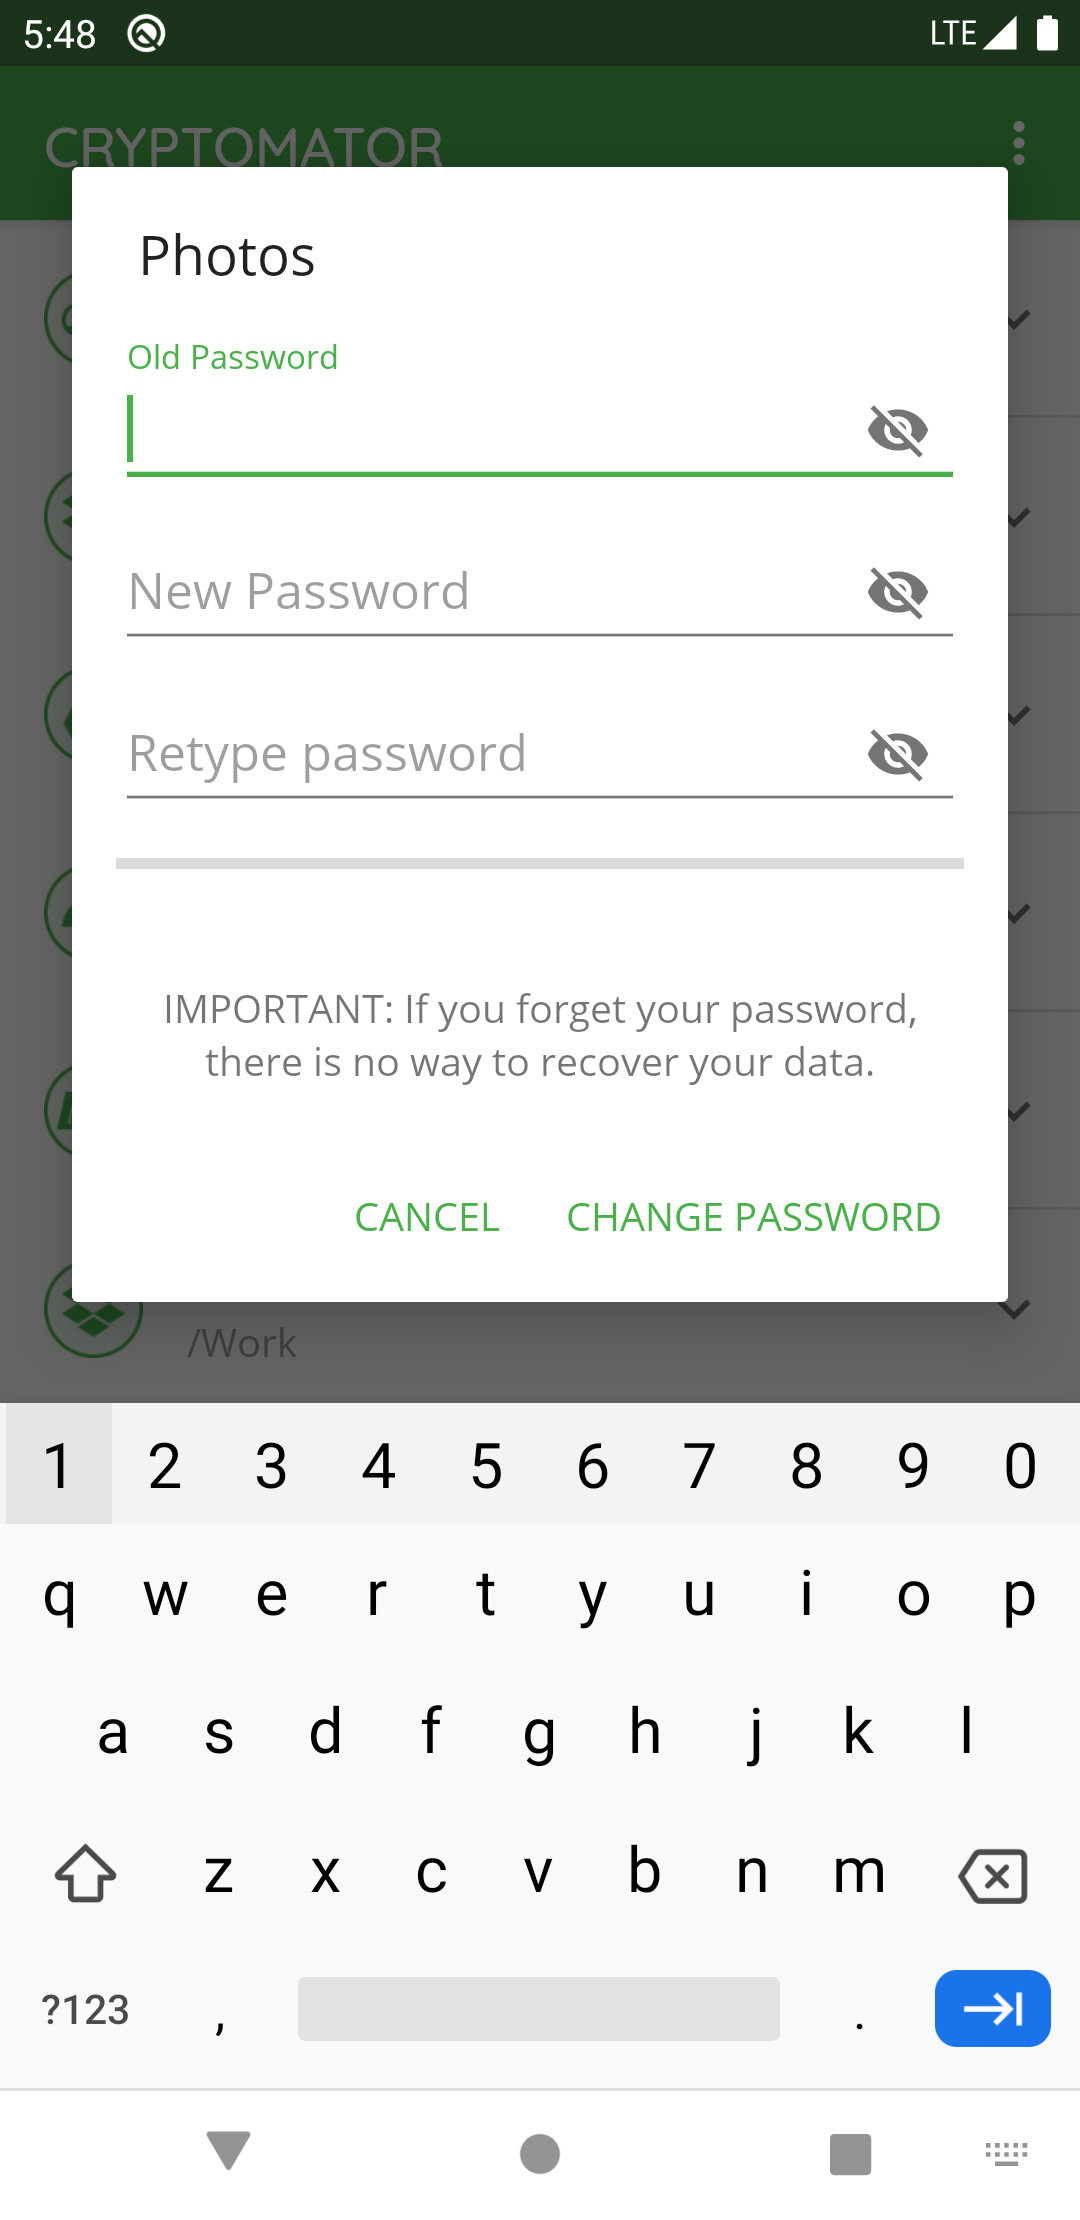 How to change a vault password with Android